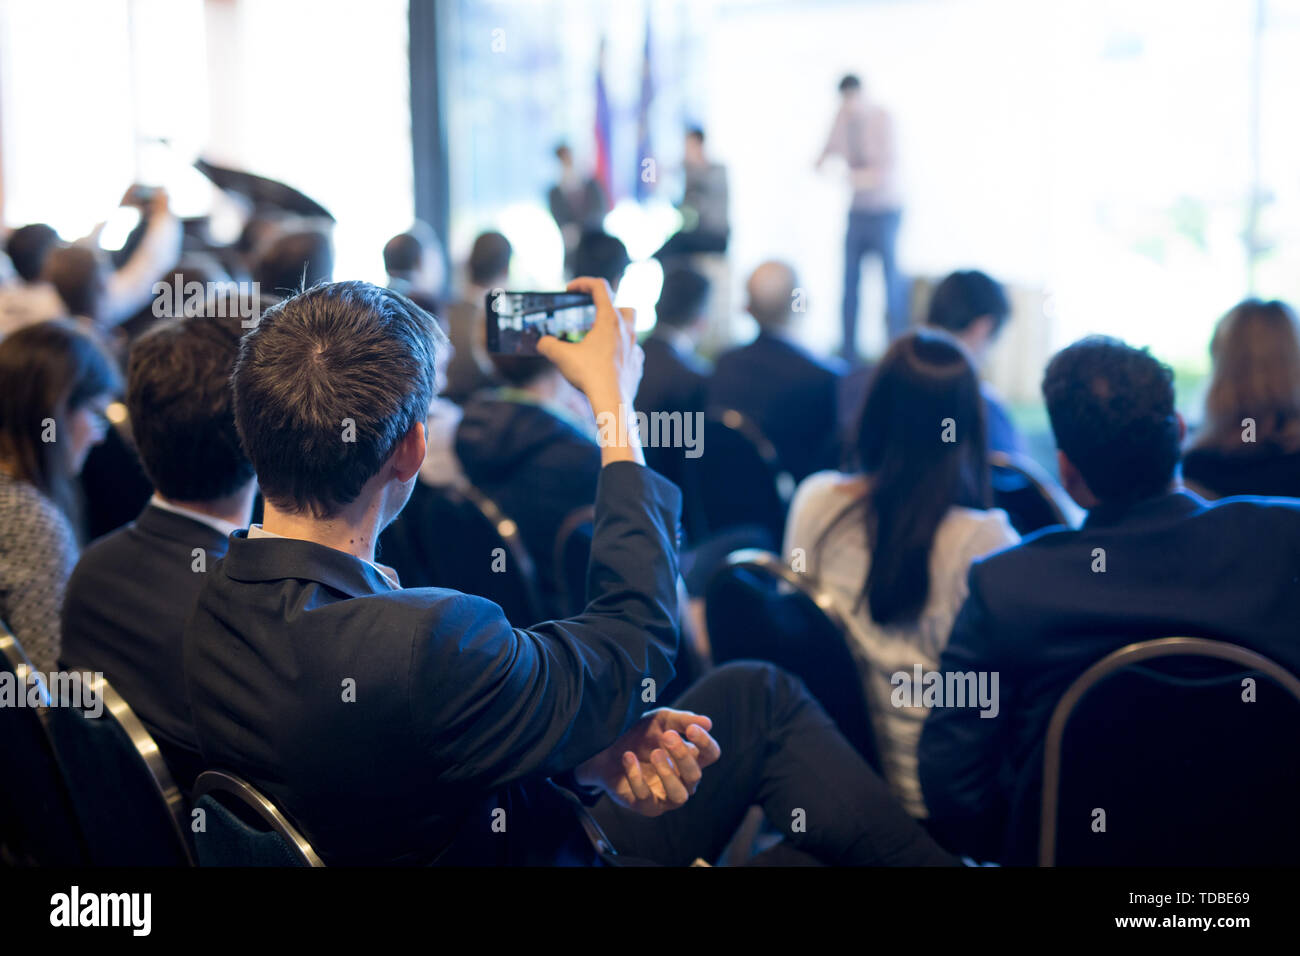 Businessman takes a picture of corporate business presentation at conference hall using smartphone. Stock Photo